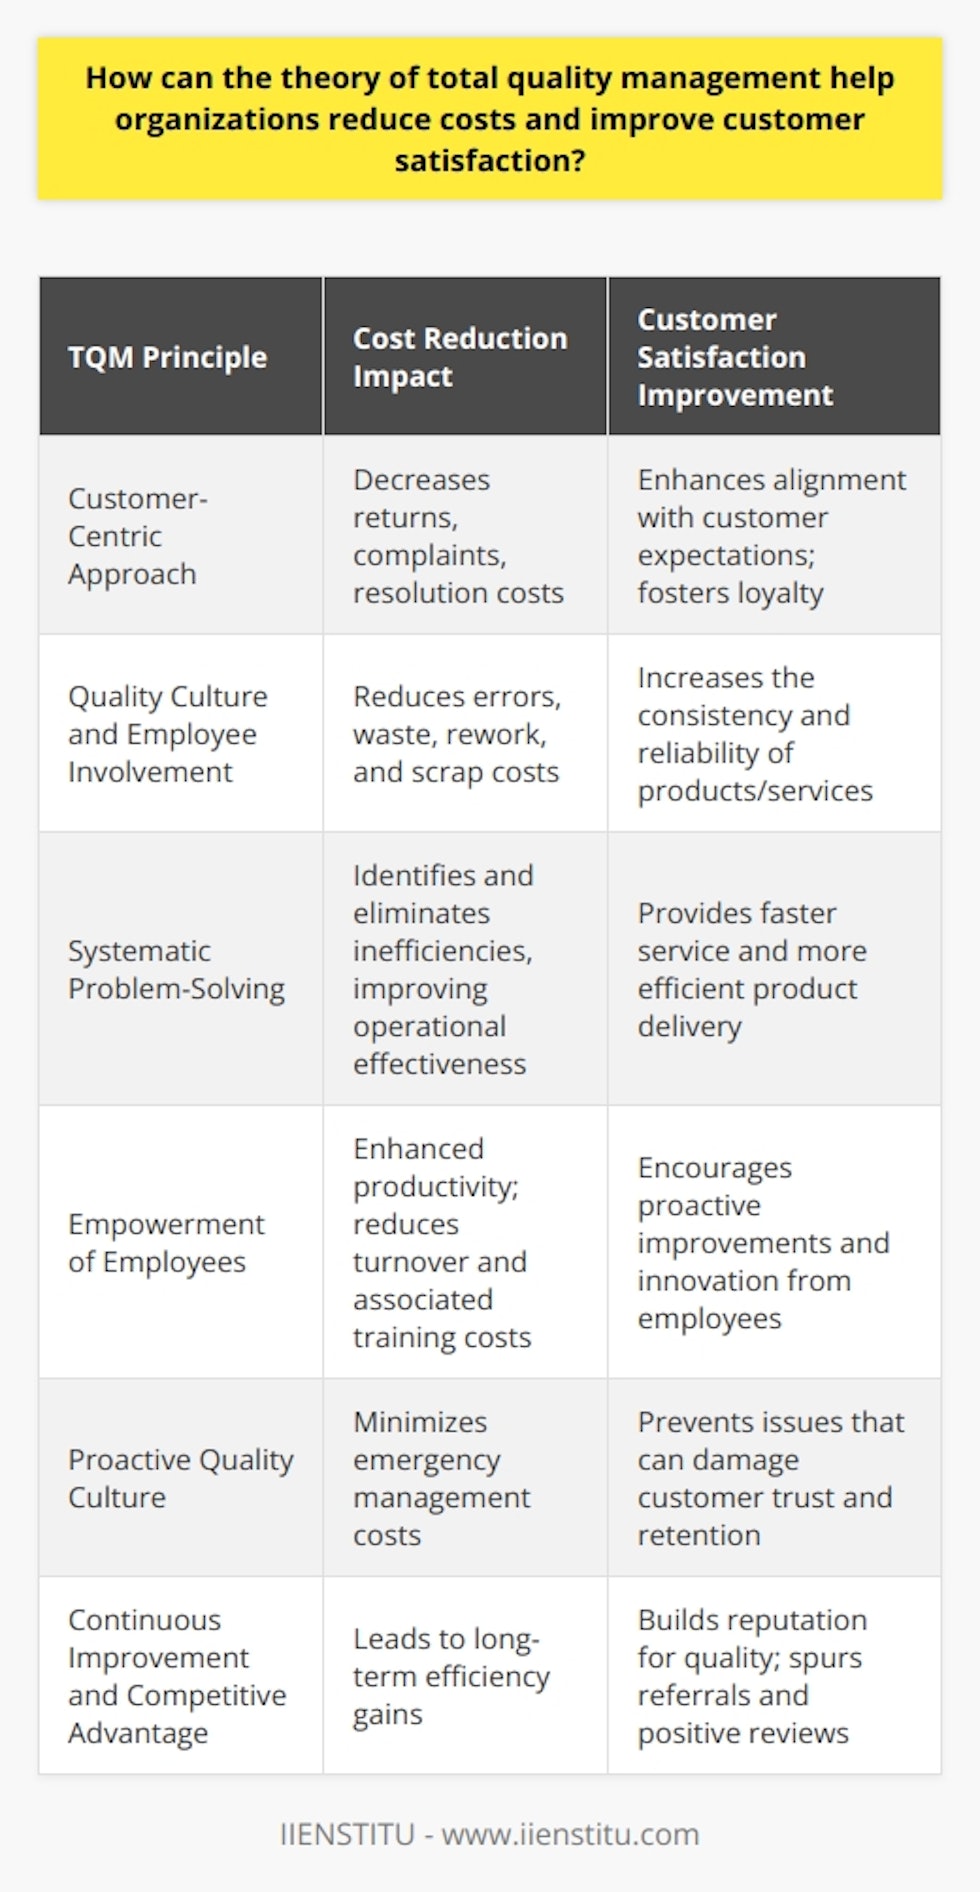 Total Quality Management (TQM) is an inclusive management philosophy that strives for the continuous improvement of products, services, and processes by focusing on quality and customer satisfaction as the top priorities. The theory of TQM can provide substantial benefits for organizations, allowing them to reduce unnecessary costs and simultaneously enhance customer satisfaction. Firstly, TQM advocates for a customer-centric approach. By rigorously understanding and meeting customer requirements, organizations ensure that their products or services align closely with market needs. This customer focus helps to reduce instances of product returns, complaints, and the costs associated with resolving such issues. The feedback mechanism inherent in TQM processes means customer input is consistently used to shape future outputs, resulting in a better match between offerings and customer expectations, thus fostering customer loyalty and repeat business. Secondly, TQM involves every level and function of an organization in the process of ensuring quality. By ingraining a culture of quality and continuous improvement among employees, organizations can minimize errors and defects in their processes. As a consequence, there is a direct reduction in waste, rework, and scrap, all of which represent cost savings. Better quality control methods and a preventive approach to errors save organizations money that would otherwise be spent on fixing problems after they have arisen.Moreover, TQM requires a systematic approach to problem-solving, which allows for the identification and elimination of inefficiencies. This involves using tools and methodologies, such as Six Sigma, lean management, and the Plan-Do-Check-Act (PDCA) cycle, which help streamline operations, improve cycle times, and reduce costs associated with inefficiencies. The practice of making incremental improvements over time ensures continual advancement in operational effectiveness.The empowerment of employees is another principle of TQM. Through training and empowerment, employees are encouraged to take initiative and contribute to problem-solving efforts. When employees feel responsible and are aware that their input matters, they tend to take greater pride in their work, leading to higher productivity and fewer mistakes. Lowering turnover rates due to increased employee satisfaction also reduces the costs related to recruiting and training new employees.By implementing TQM, organizations foster a proactive culture of quality that anticipates potential issues before they occur. This forward-looking stance reduces the likelihood of costly emergency management or damage control situations, which can greatly impact both expenditures and customer perceptions. Lastly, through the continuous pursuit of quality, businesses gain a competitive advantage. This not only establishes a reputation for reliability and superior service or product but also encourages customer referrals and positive reviews, which are invaluable for business growth.In the context of professional development and organizational training, institutions like IIENSTITU offer programs that can assist individuals and organizations in understanding and leveraging TQM principles to achieve these benefits of cost reduction and heightened customer satisfaction. Training in TQM equips learners with the strategies and tools necessary to implement and sustain quality management practices, creating environments where quality is the rule, not the exception. In conclusion, the application of TQM principles can significantly help organizations in reigning in costs and improving customer satisfaction. This is achieved through a strong commitment to quality, customer focus, efficient processes, employee empowerment, and continuous improvement. An organization deeply vested in TQM is well-positioned to deliver products and services that not only meet but exceed customer expectations, while simultaneously maintaining an efficient and cost-effective operation.